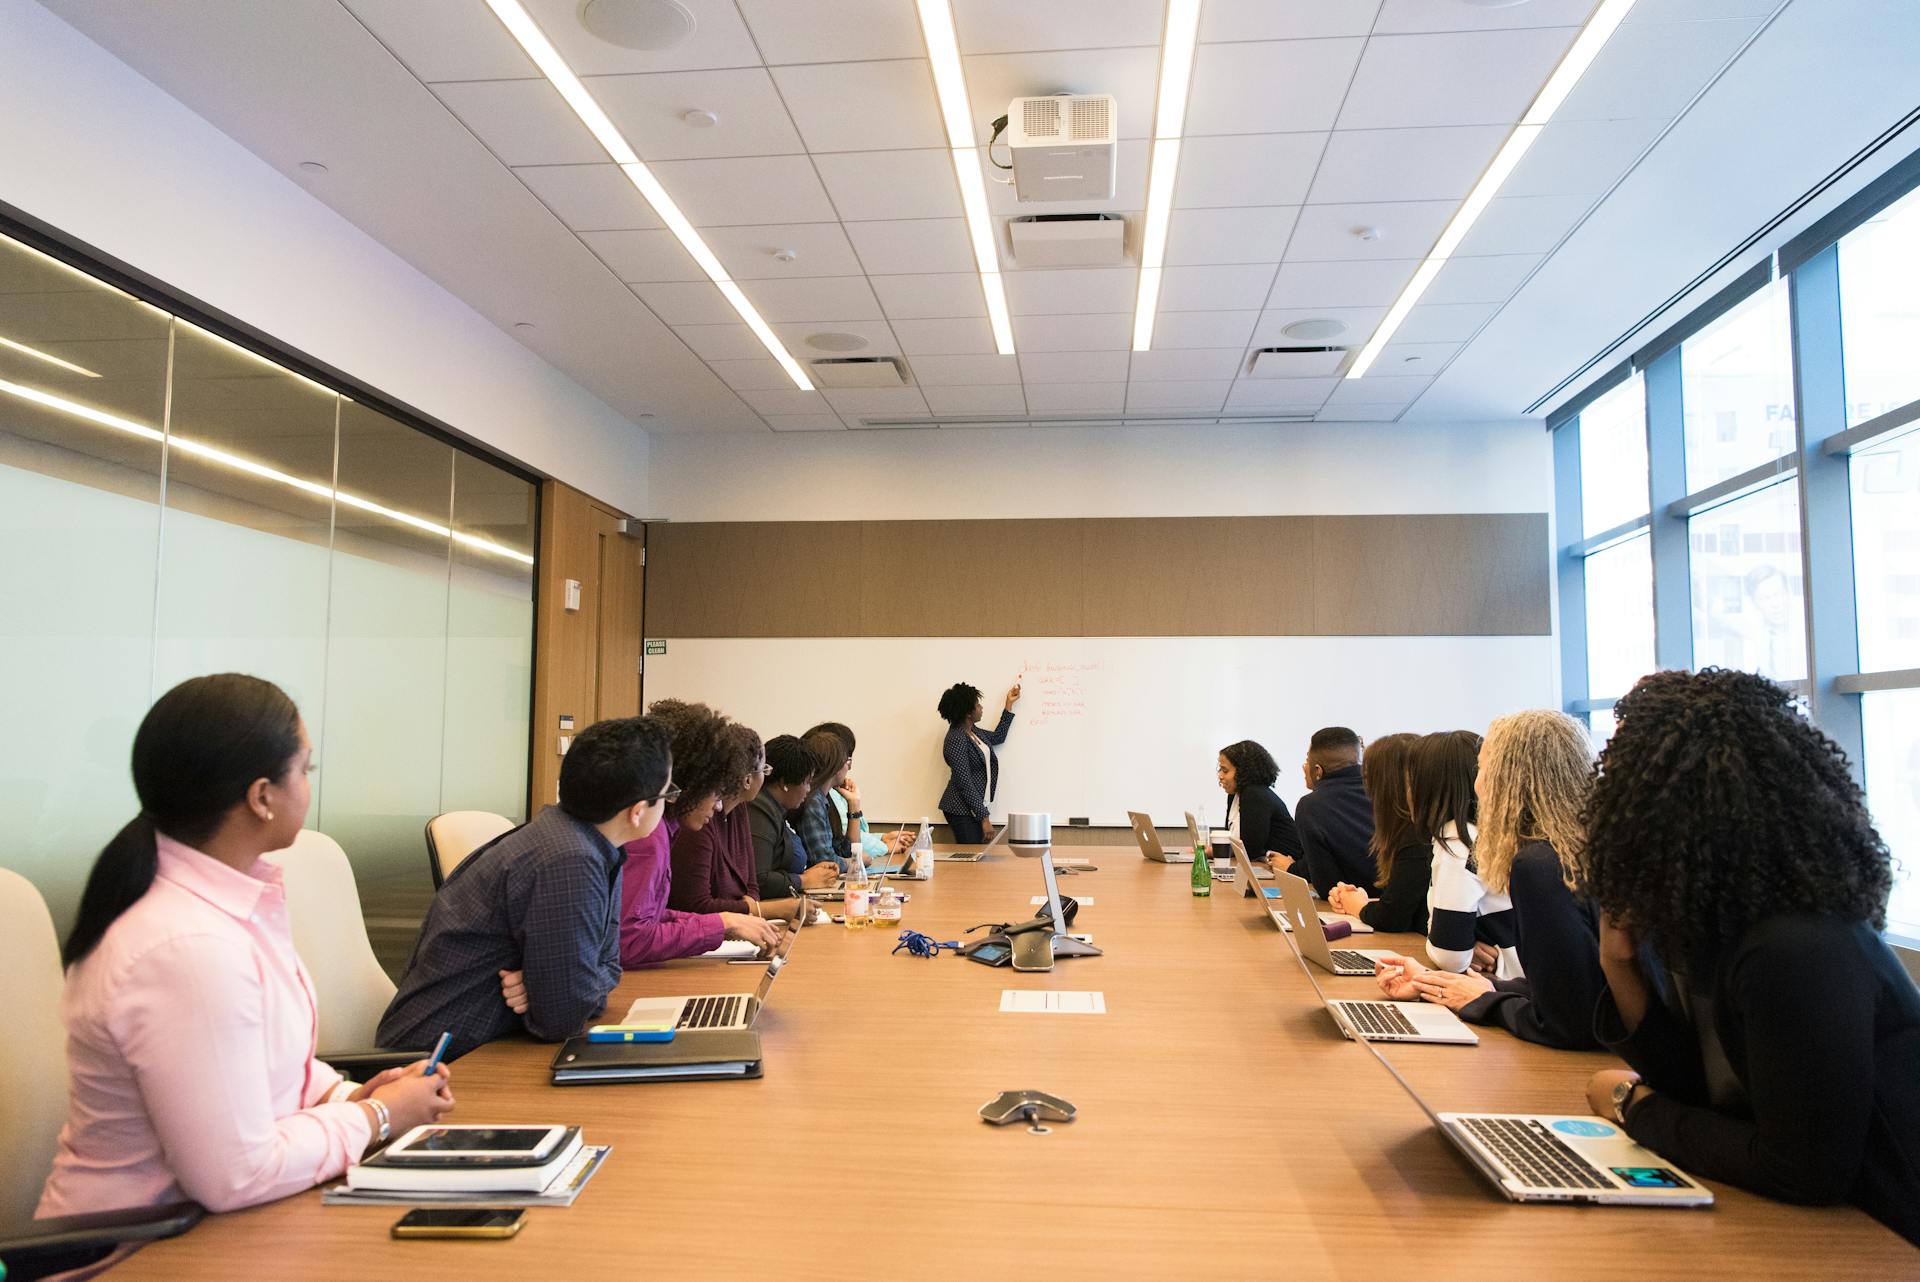 People in a conference room during | Source: Pexels